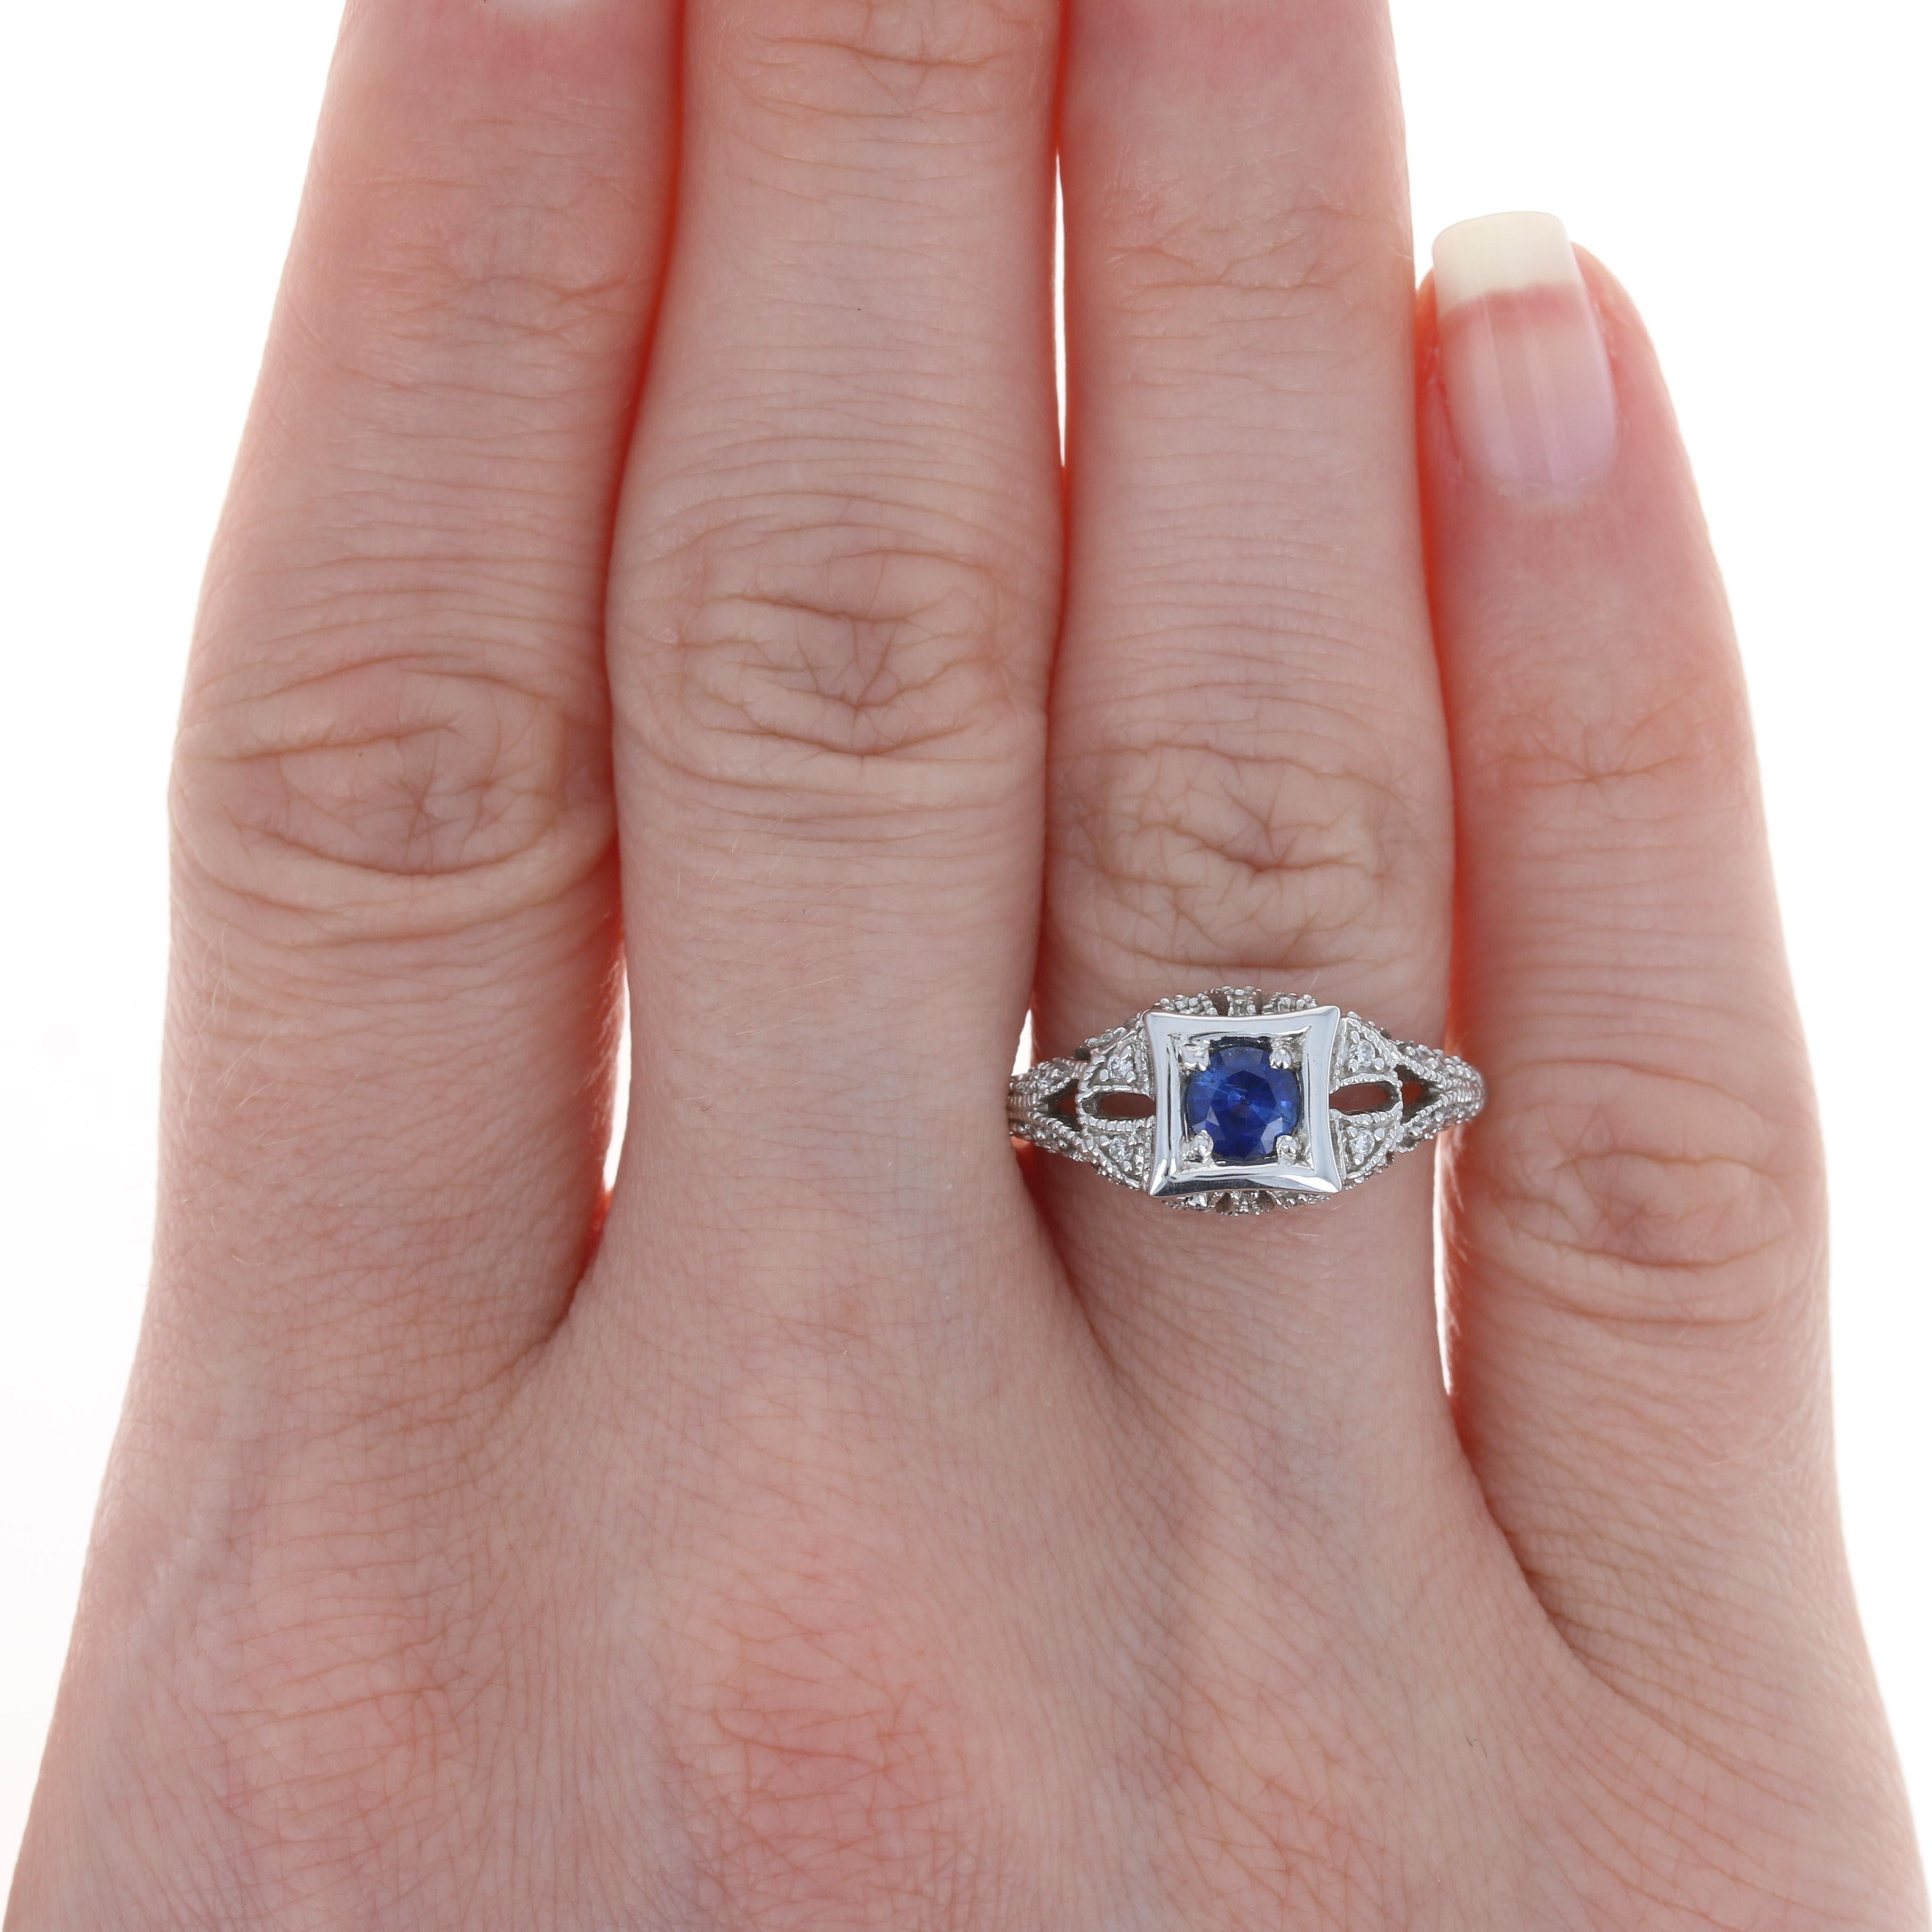 The essence of elegance, this ring is the perfect gift for someone celebrating a special birthday or milestone anniversary. This gorgeous NEW piece is fashioned in high purity 18k white gold and features a navy-blue sapphire in a polished bezel